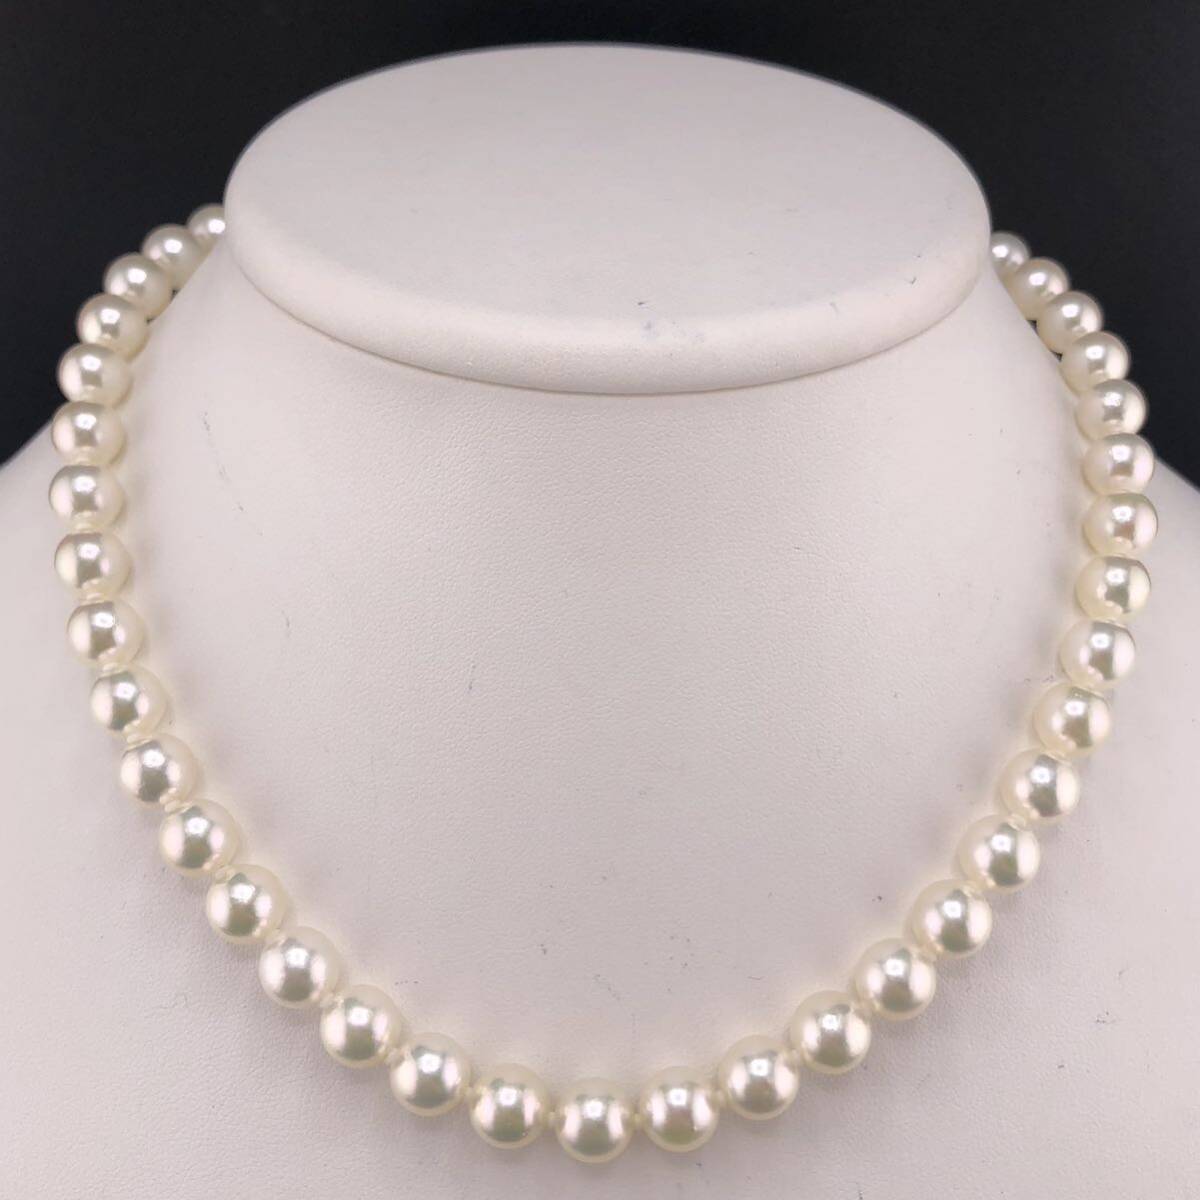 E04-6178 鑑別書付き☆アコヤパールネックレス 8.0mm~8.5mm 40cm 39.8g ( アコヤ真珠 Pearl necklace SILVER オーロラ jewelry )の画像1